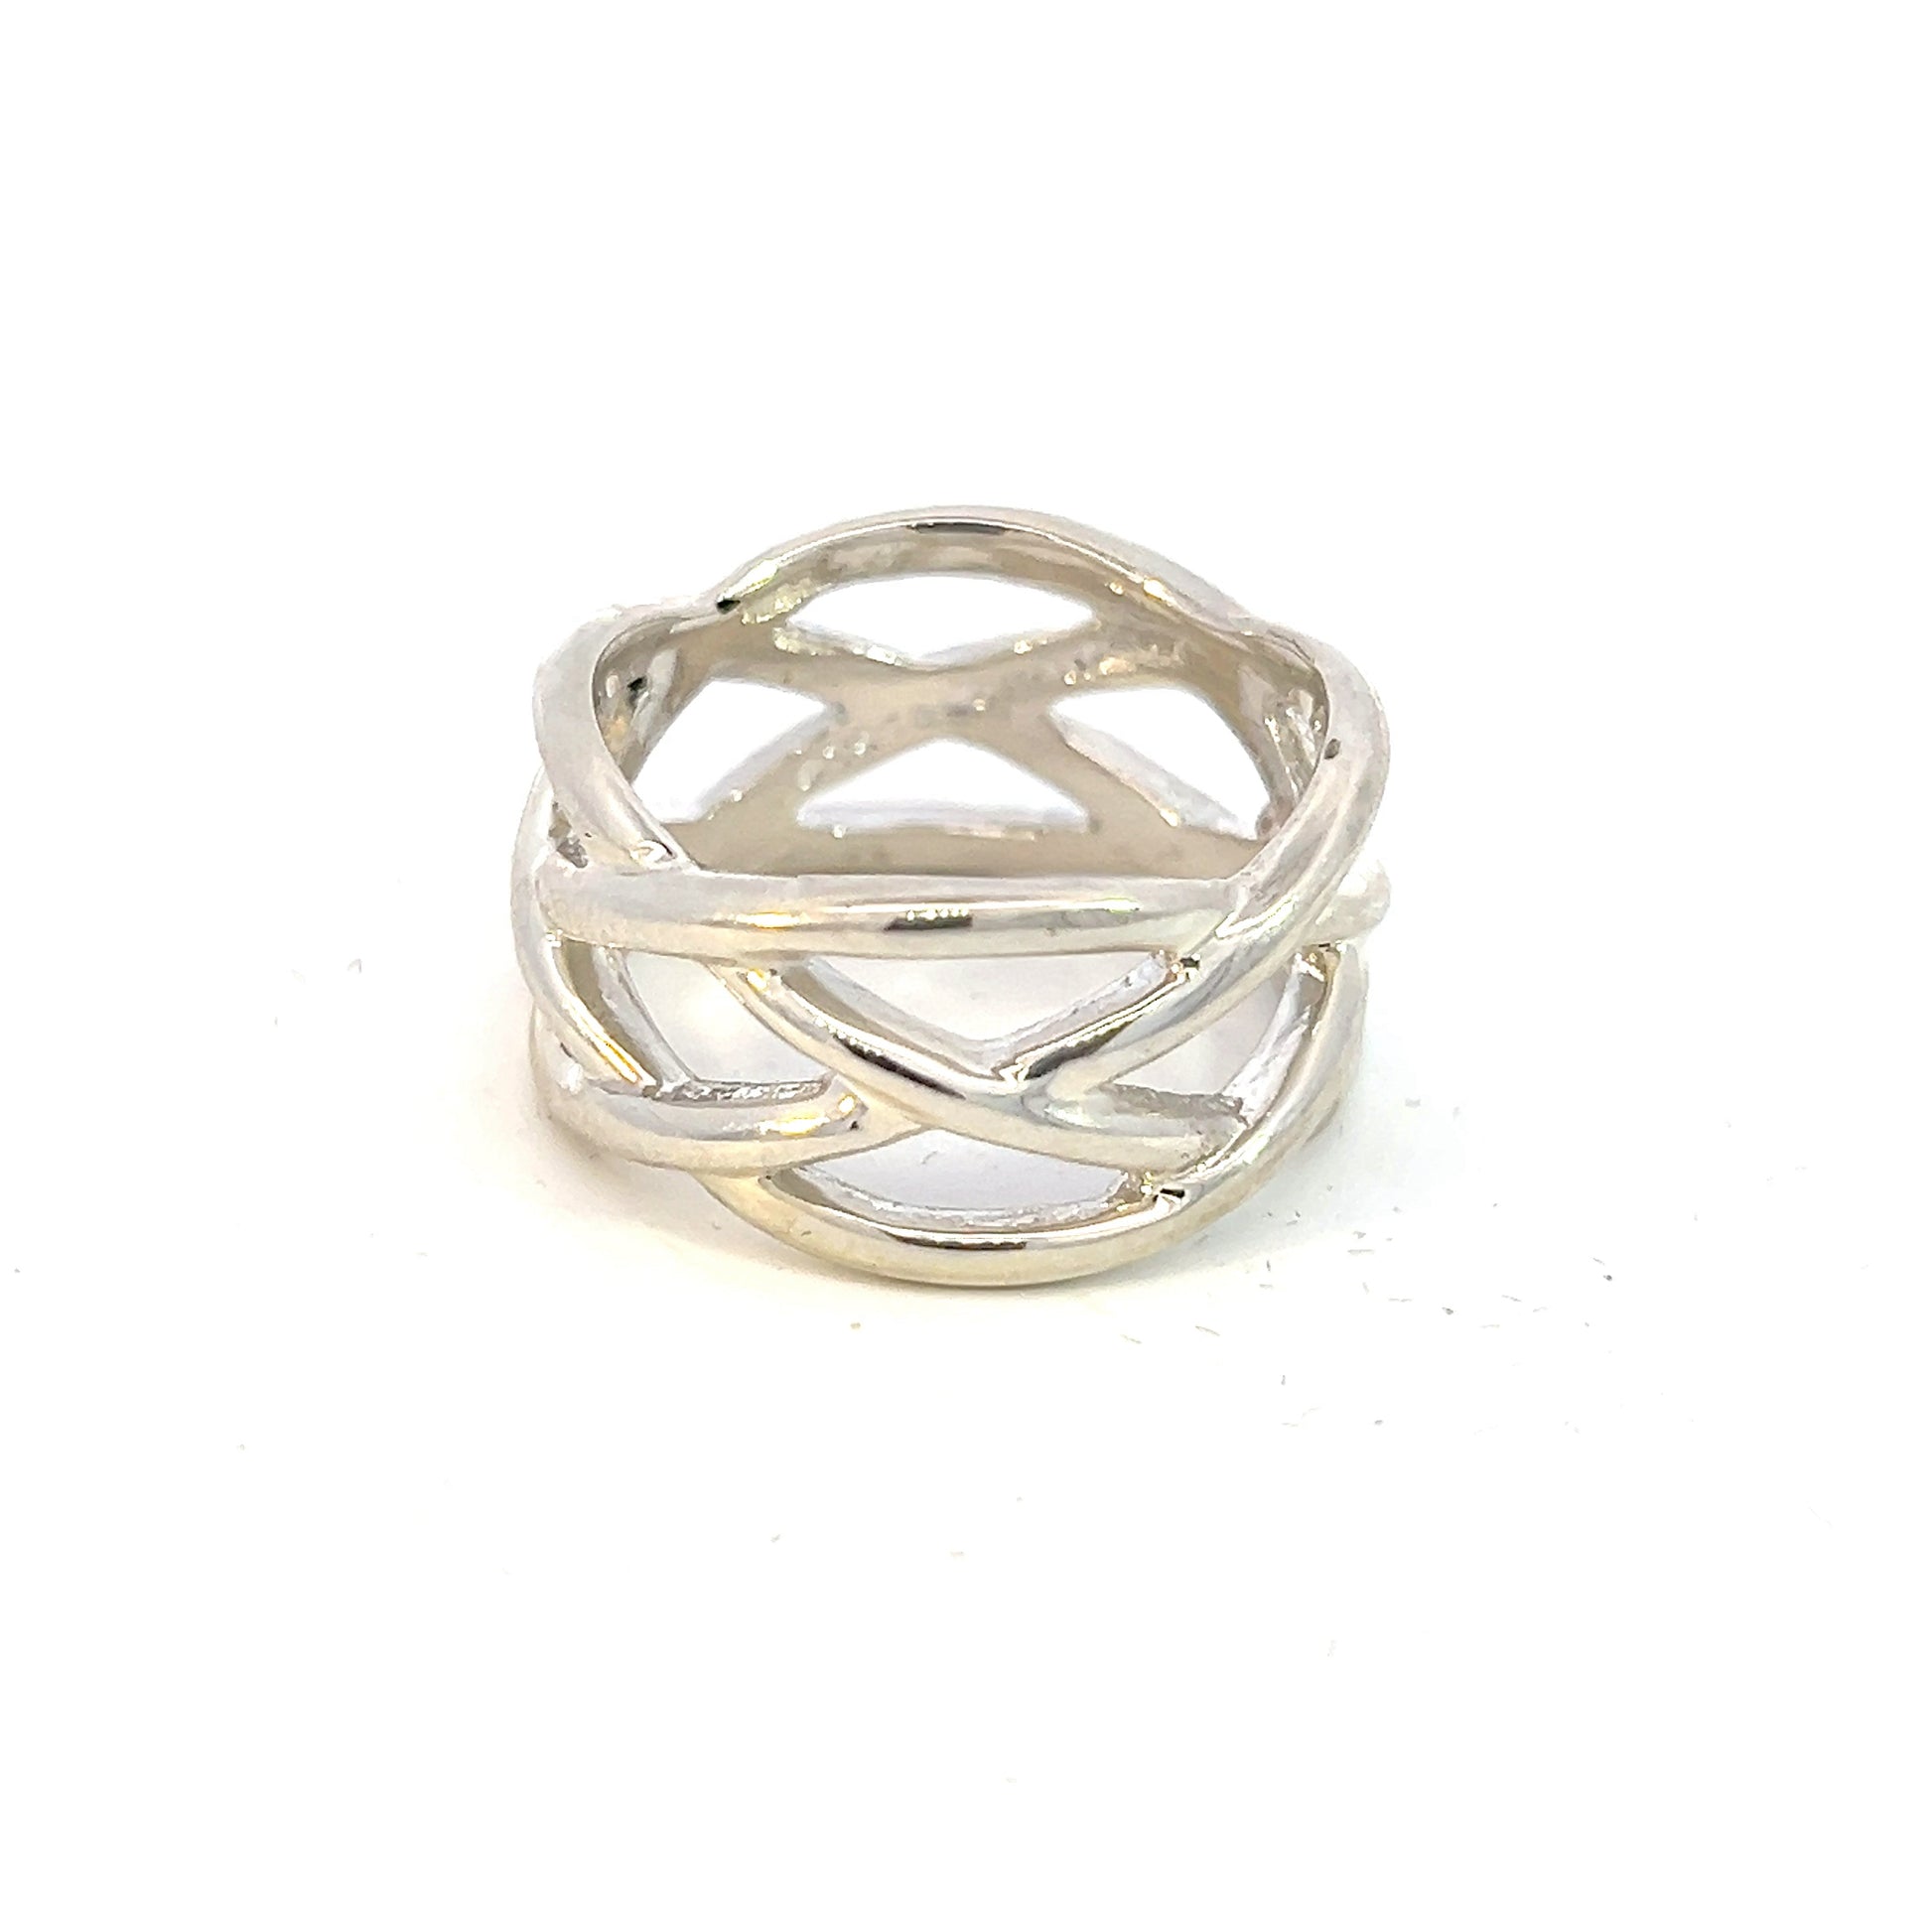 Tiffany & Co Estate Celtic Knot Ring Size 10 Sterling Silver 12 mm TIF565 - Certified Fine Jewelry